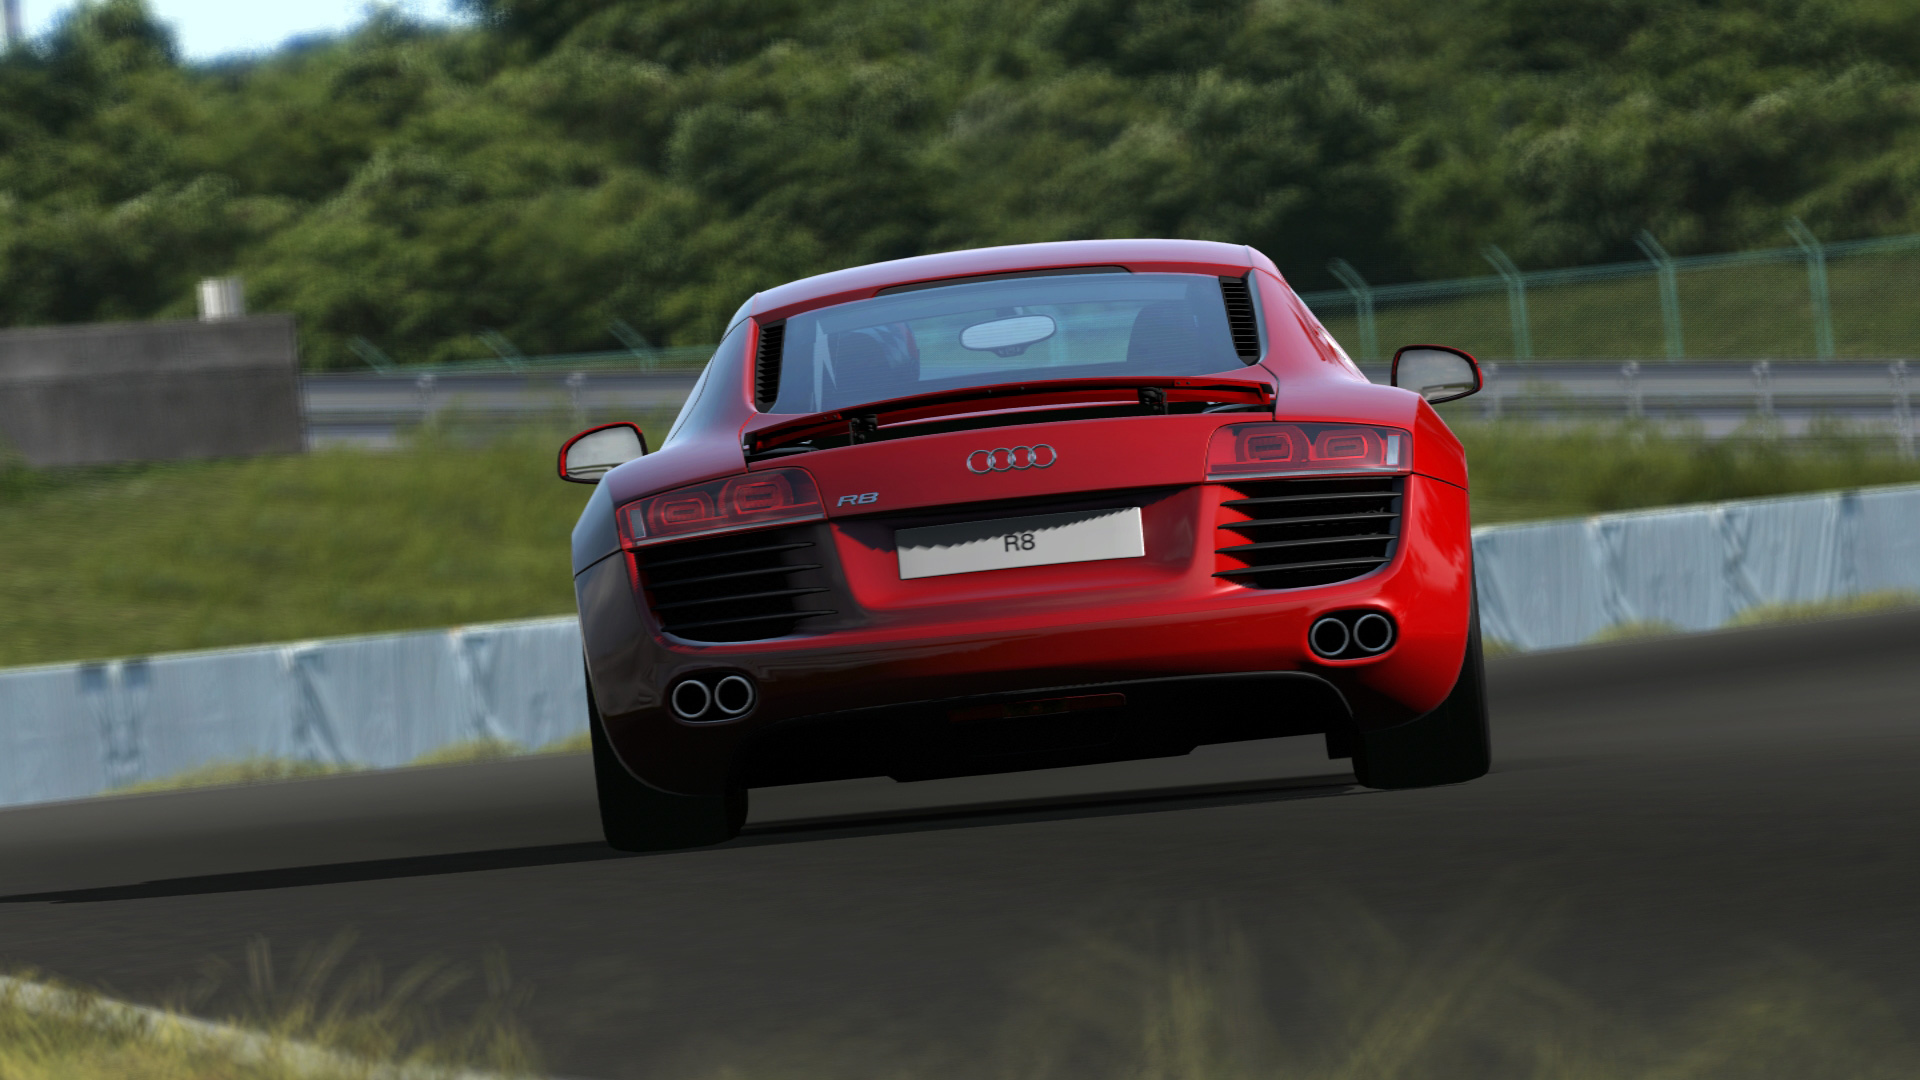 Gran Turismo 5 Prologue Game Wallpapers, HD Wallpapers